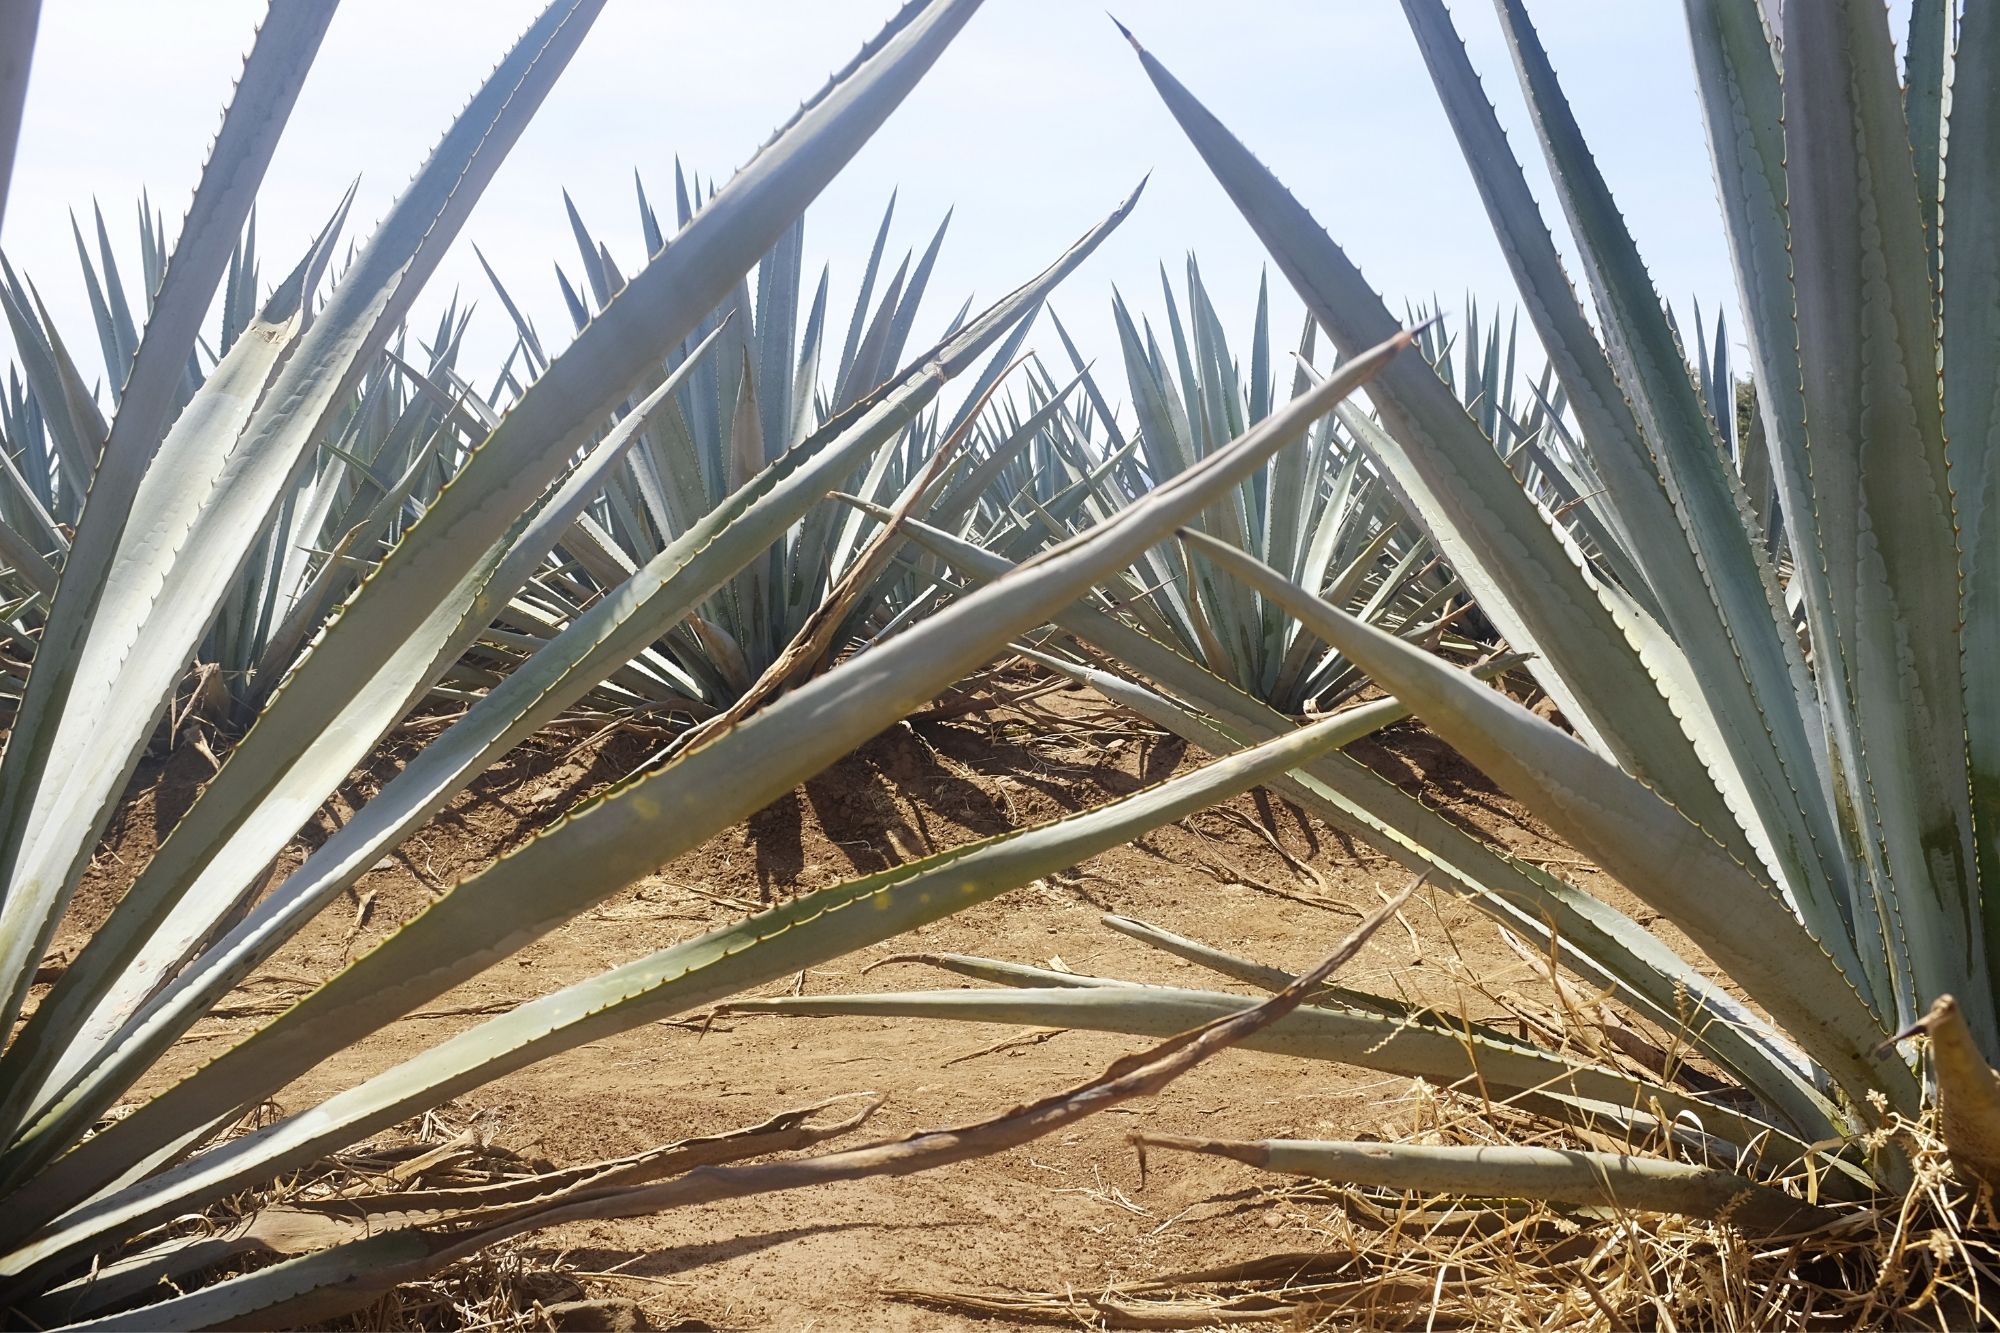 Agave plants in a field